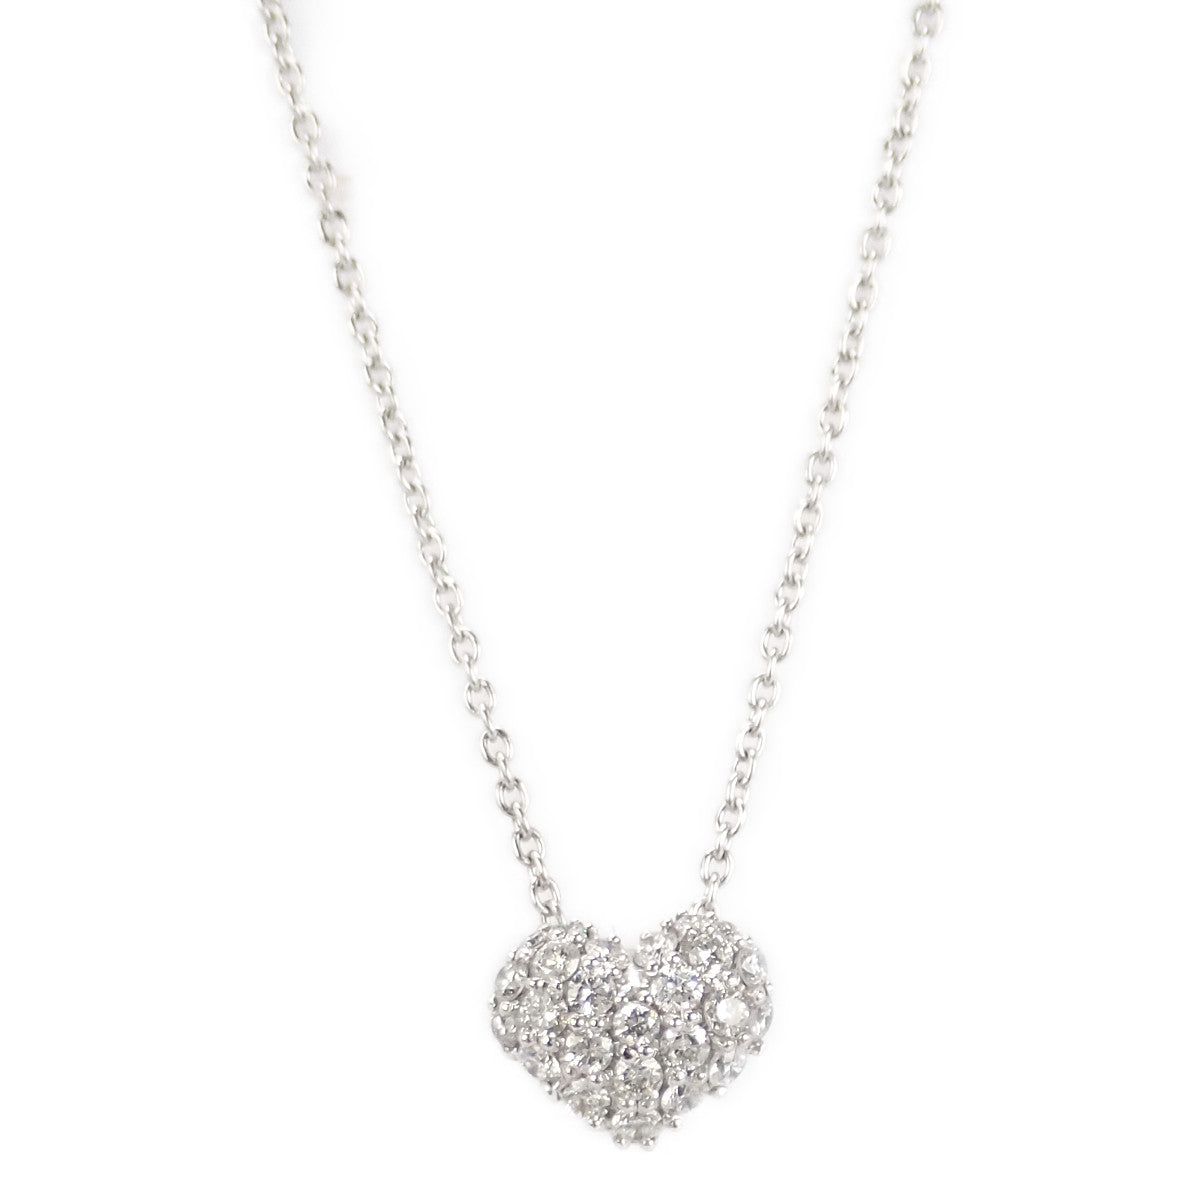 LuxUness  Designer Jewelry Heart Necklace in K18 White Gold with Diamond 0.47ct for Ladies - Silver in Excellent condition